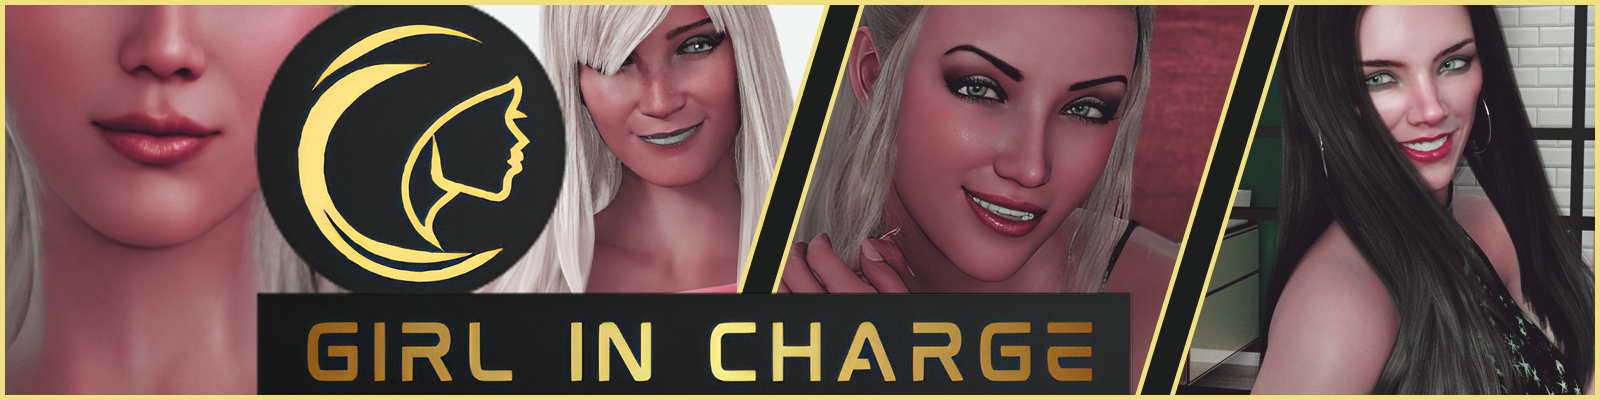 Girl in Charge - Chapter 6 Part 1 poster